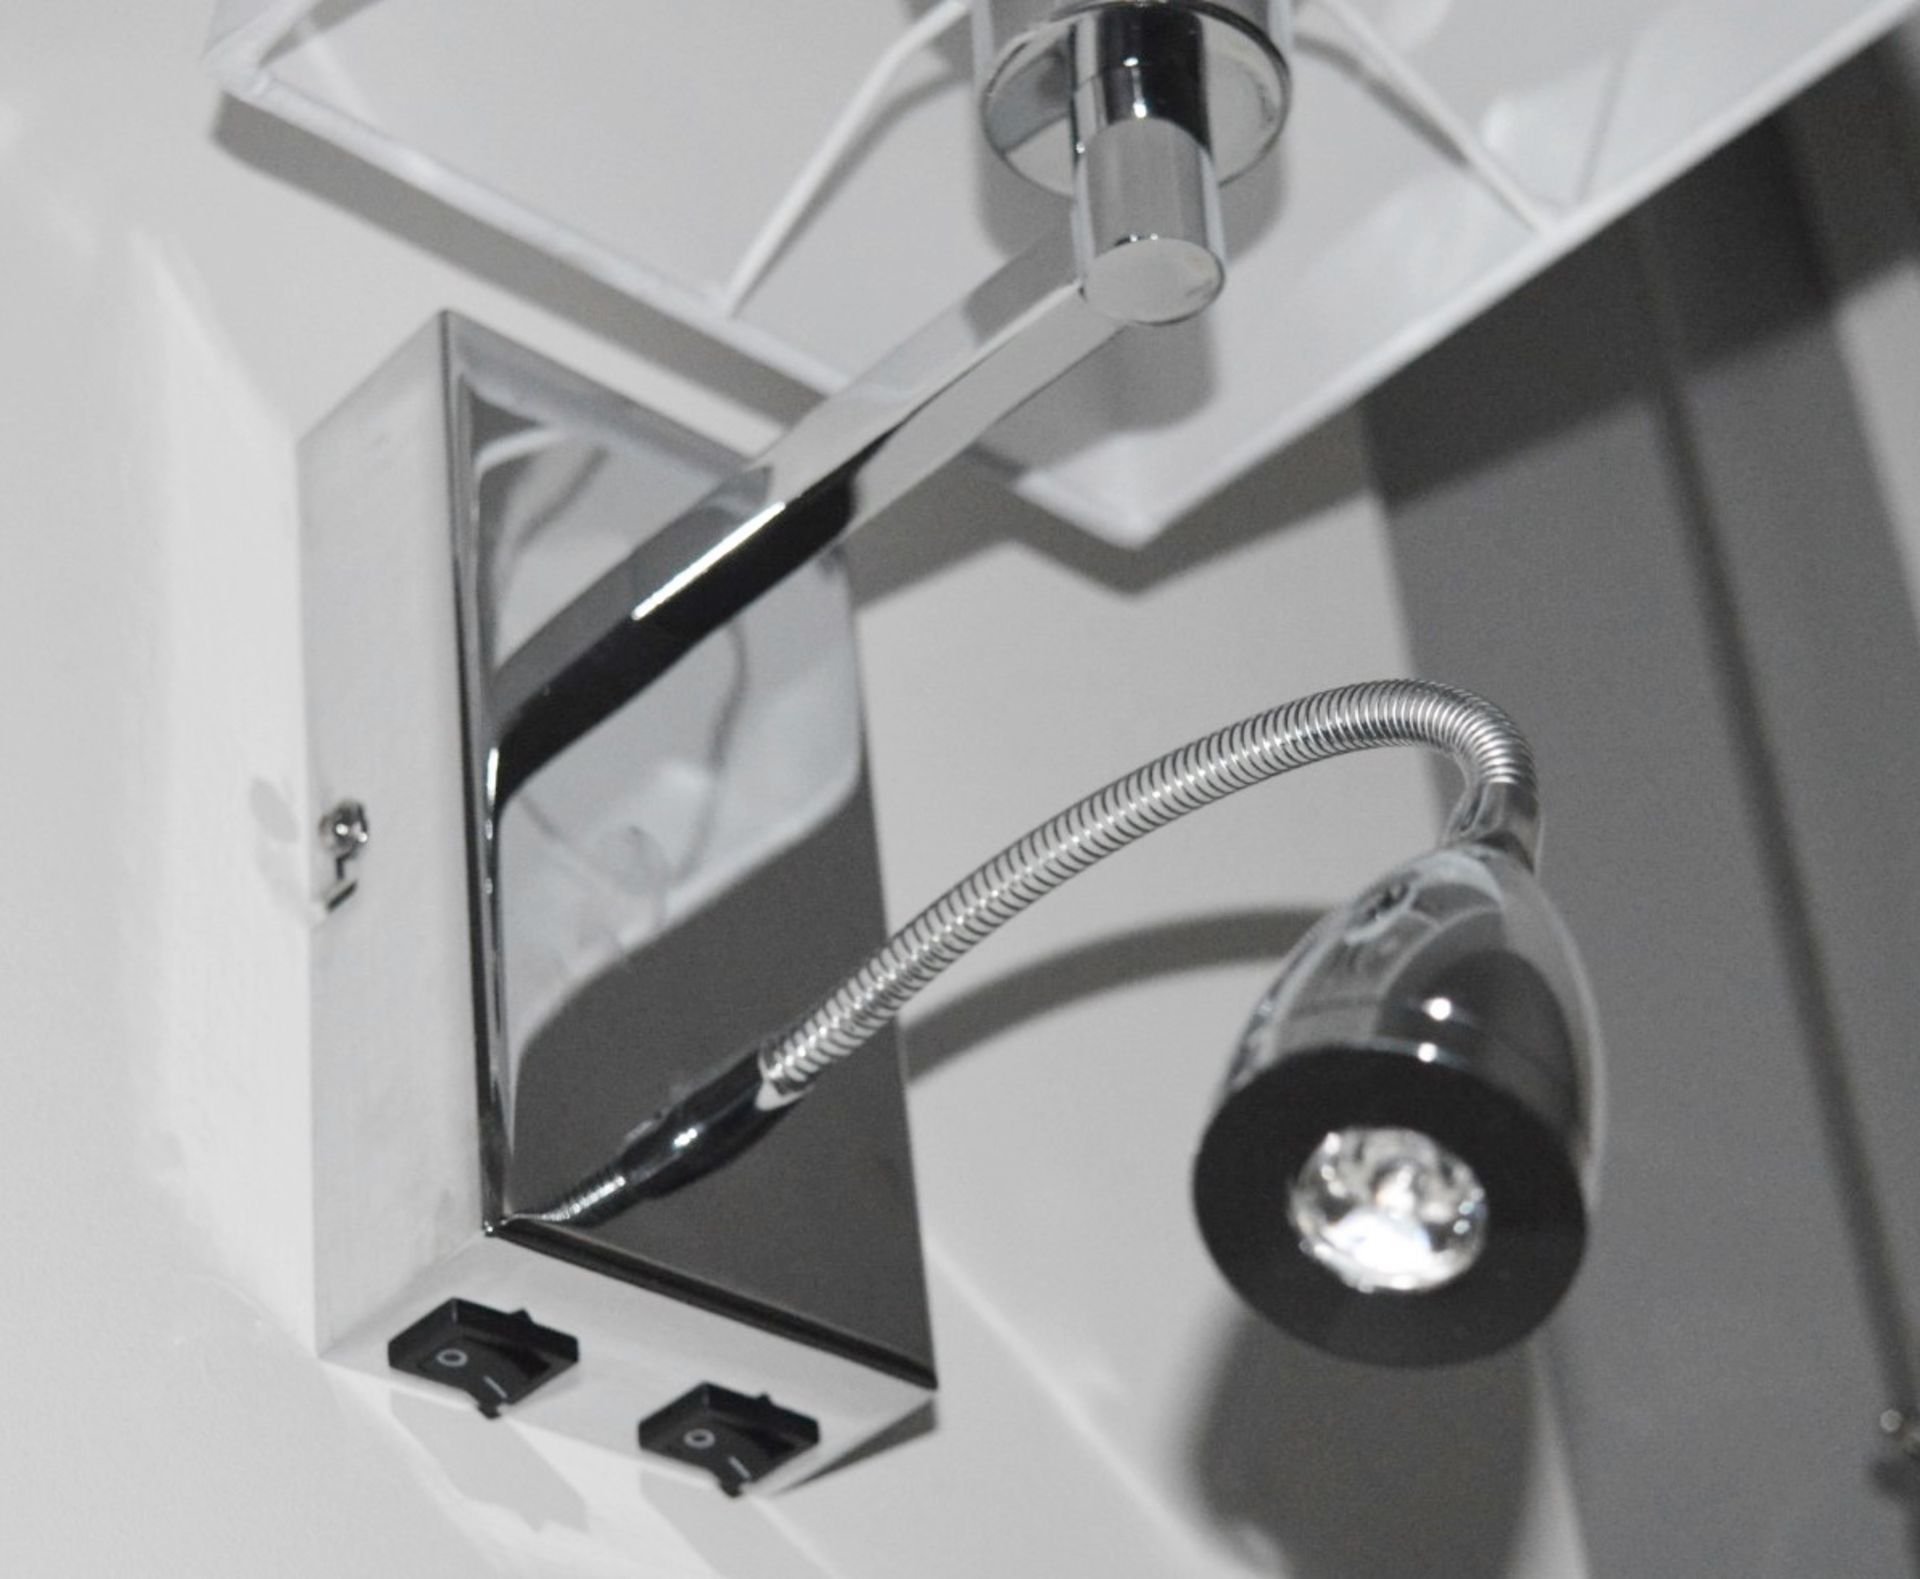 1 x Chrome Wall Light With White Shade Incorporating Led Flexi-arm - Ex Display - RRP £136.80 - Image 3 of 4